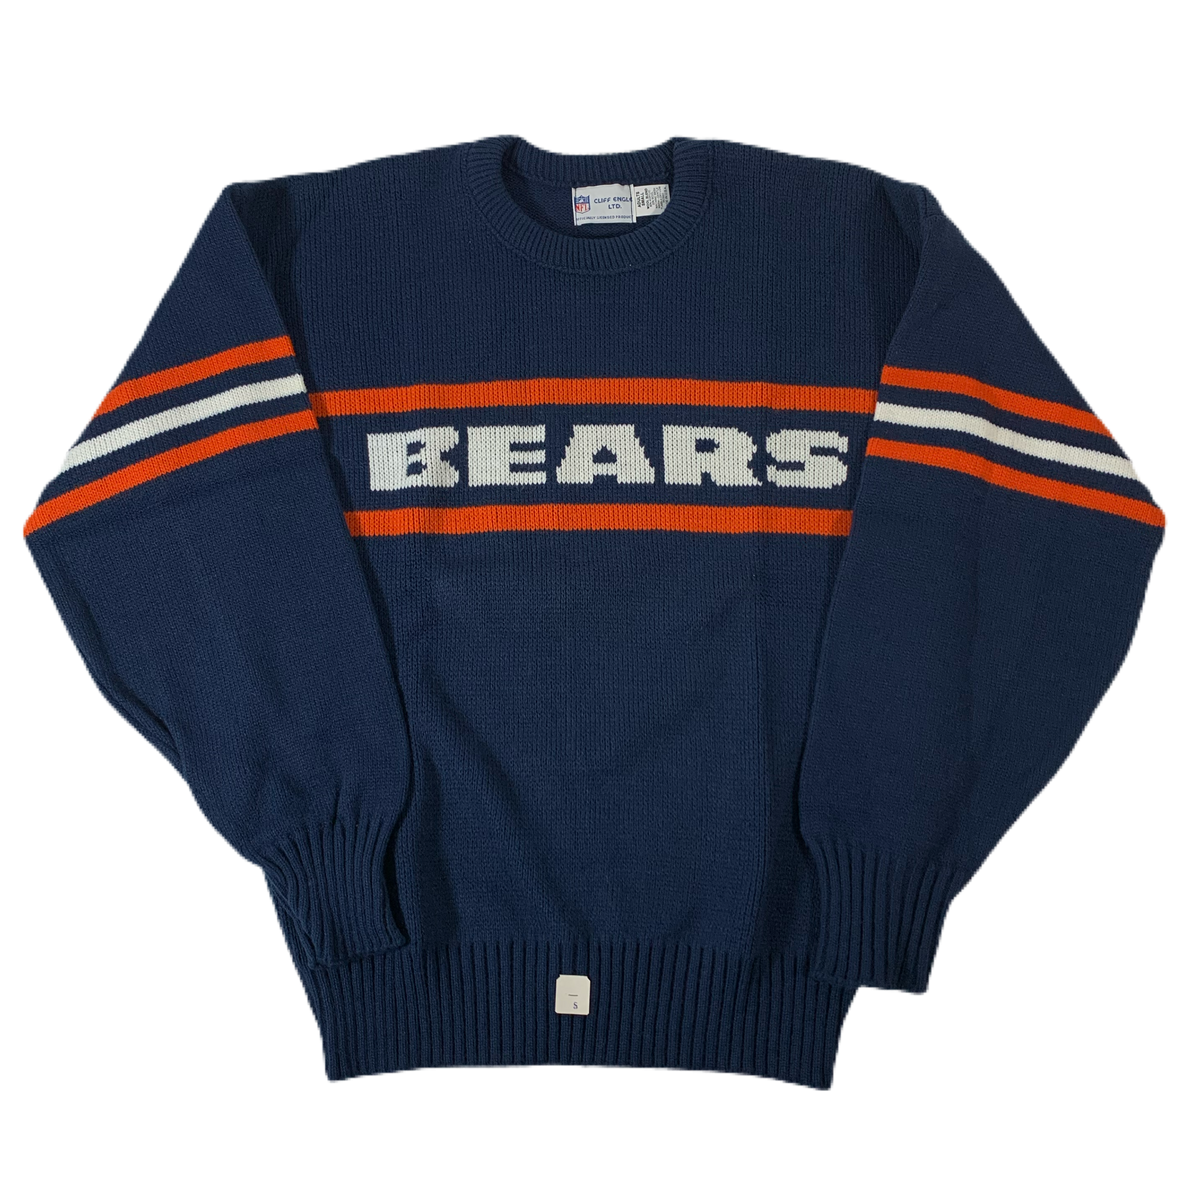 Vintage Chicago Bears “Cliff Engle” Knit Sweater | jointcustodydc